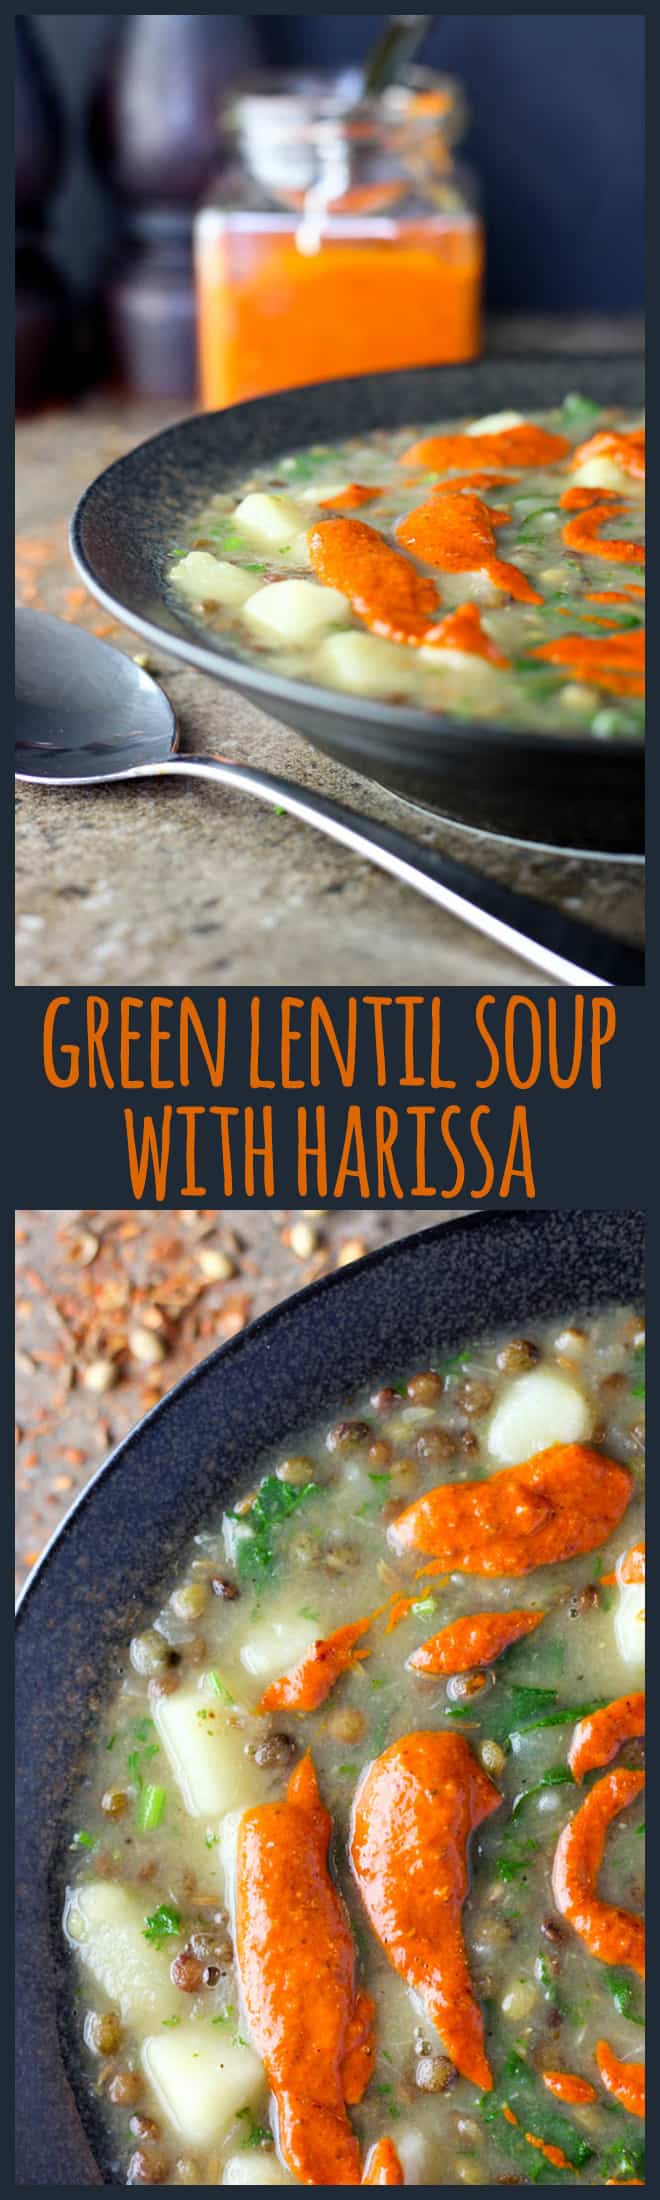 Cheap, simple ingredients treated with a little love and given a lift with spicy harissa create a delicious soup which is hearty and healthy.